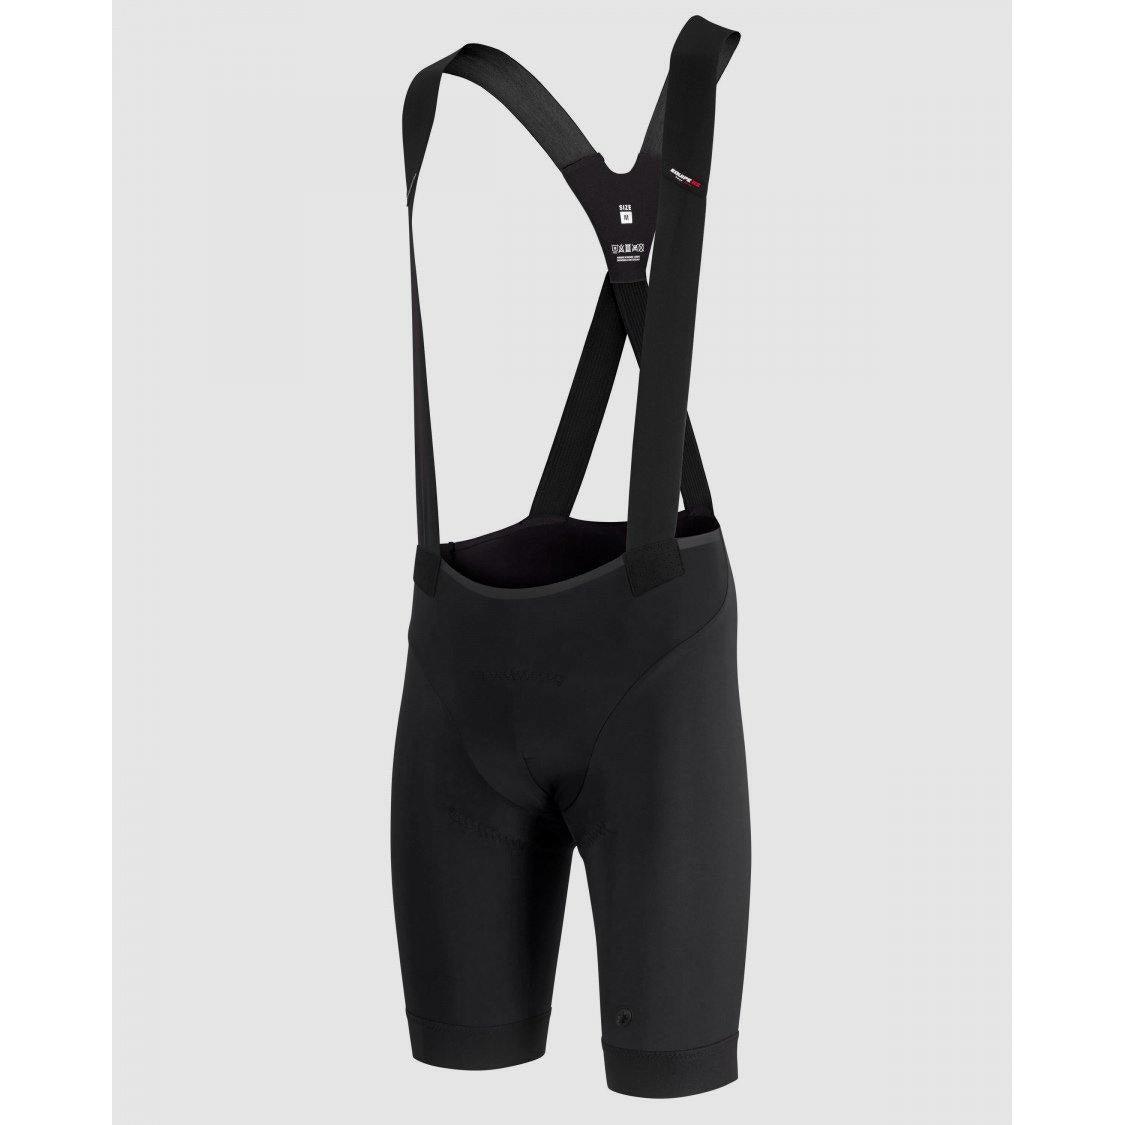 Assos of Switzerland Equipe RS Bib Short S9 | Strictly Bicycles